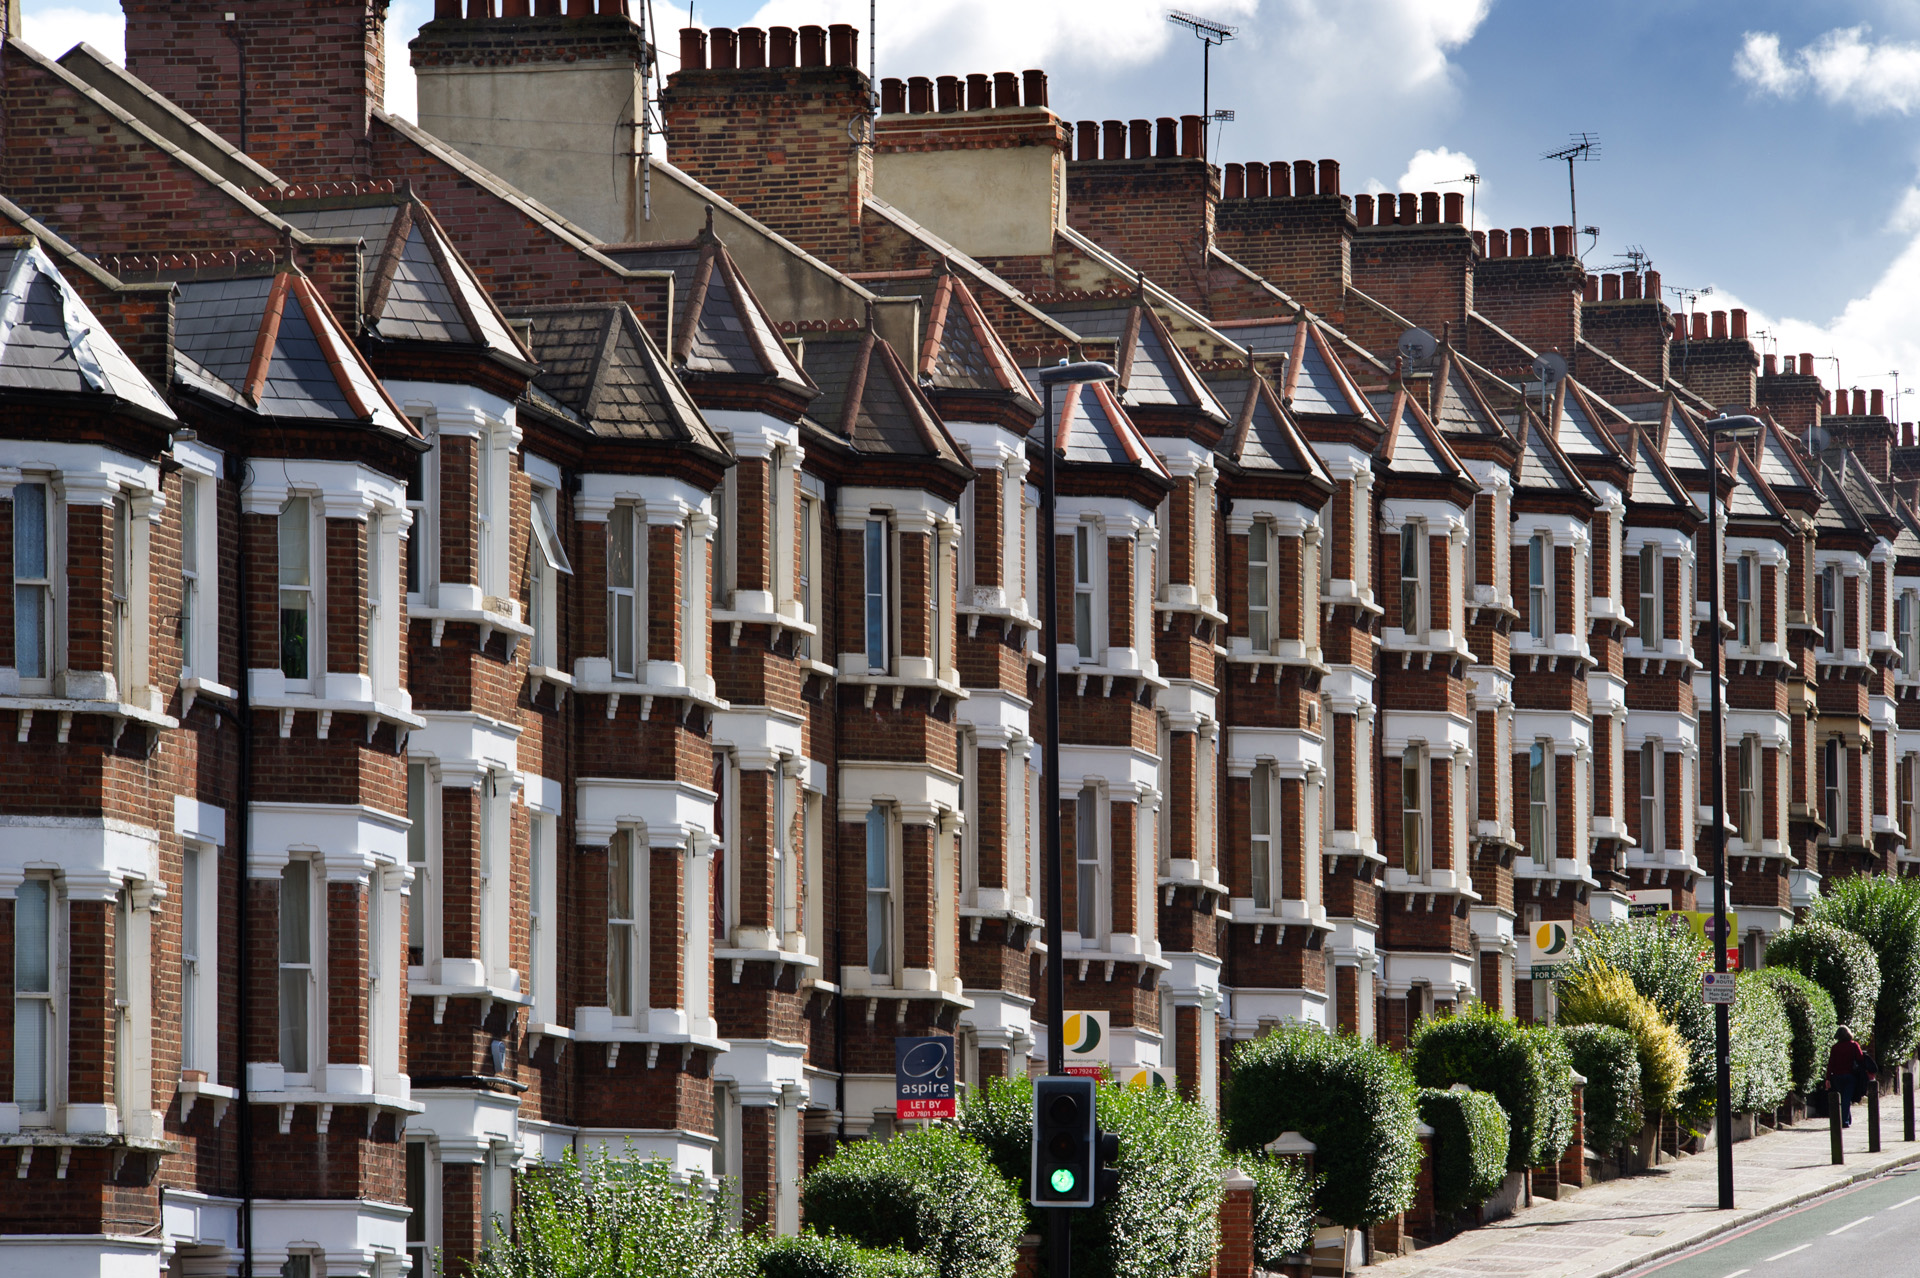 Latchmere Road, Battersea, London.  General view of terraced housing.